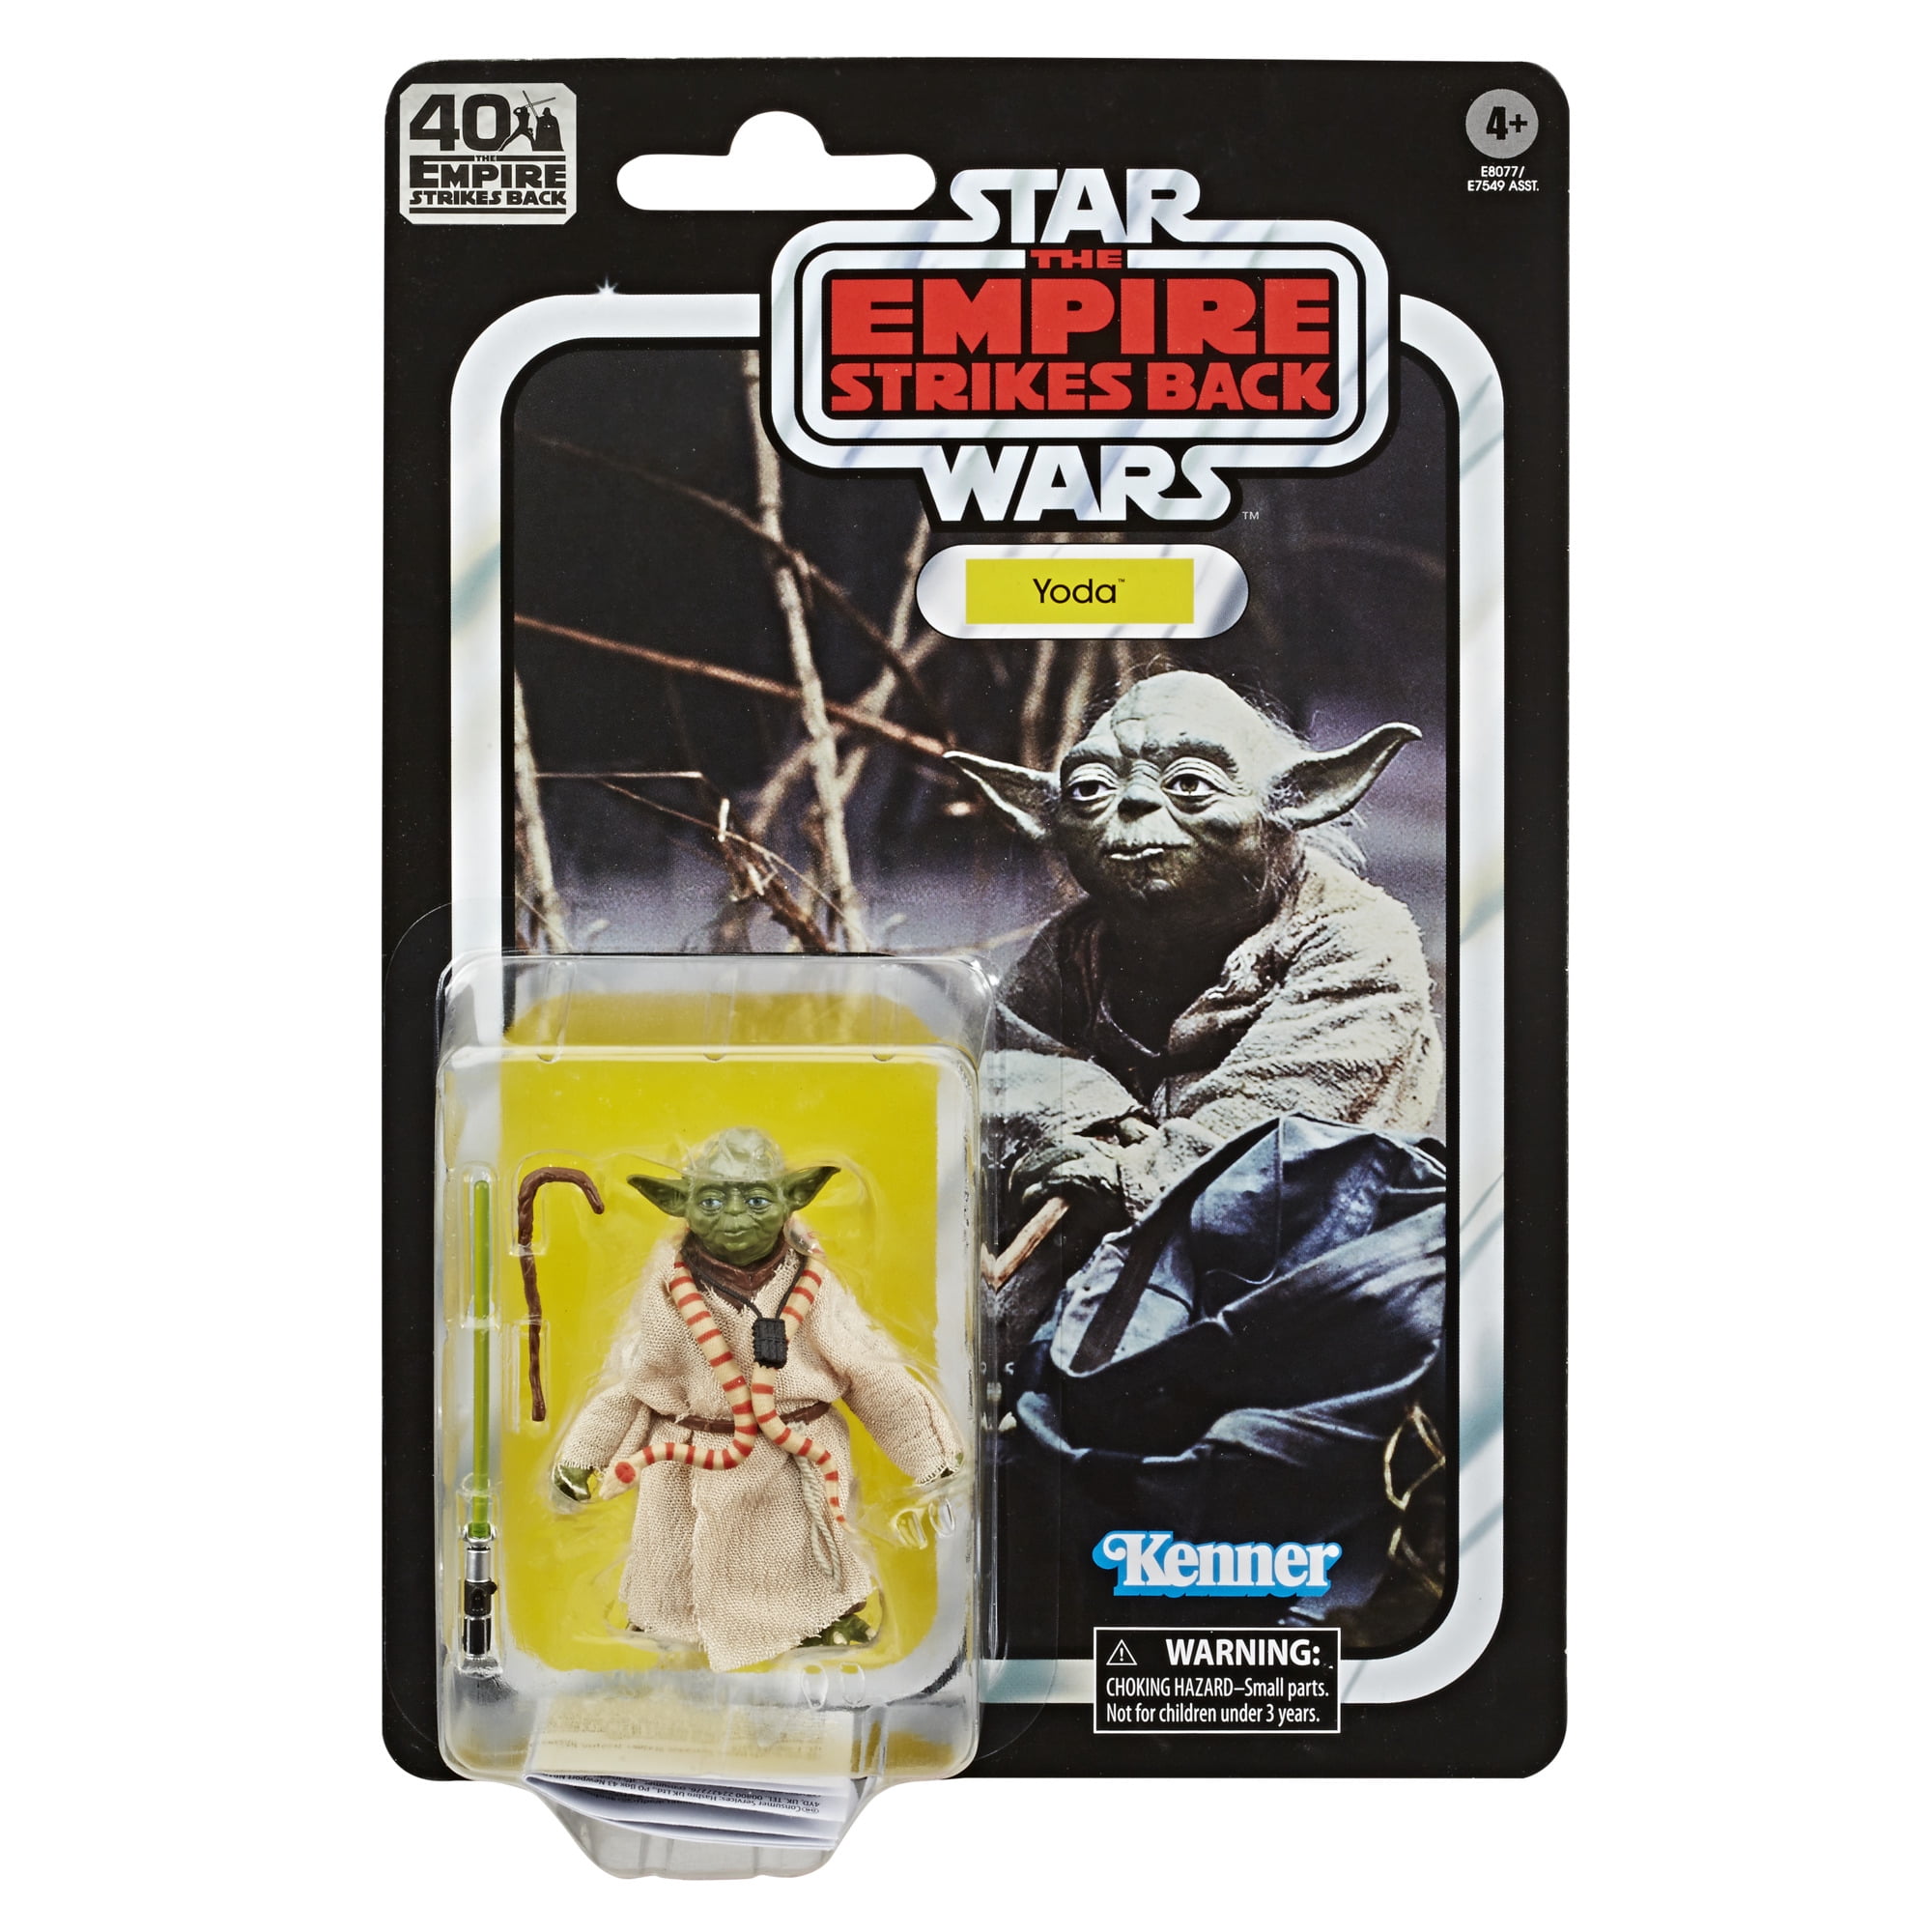 Yoda Legends Sl09 Legacy Collection Star Wars Action Figure for sale online 